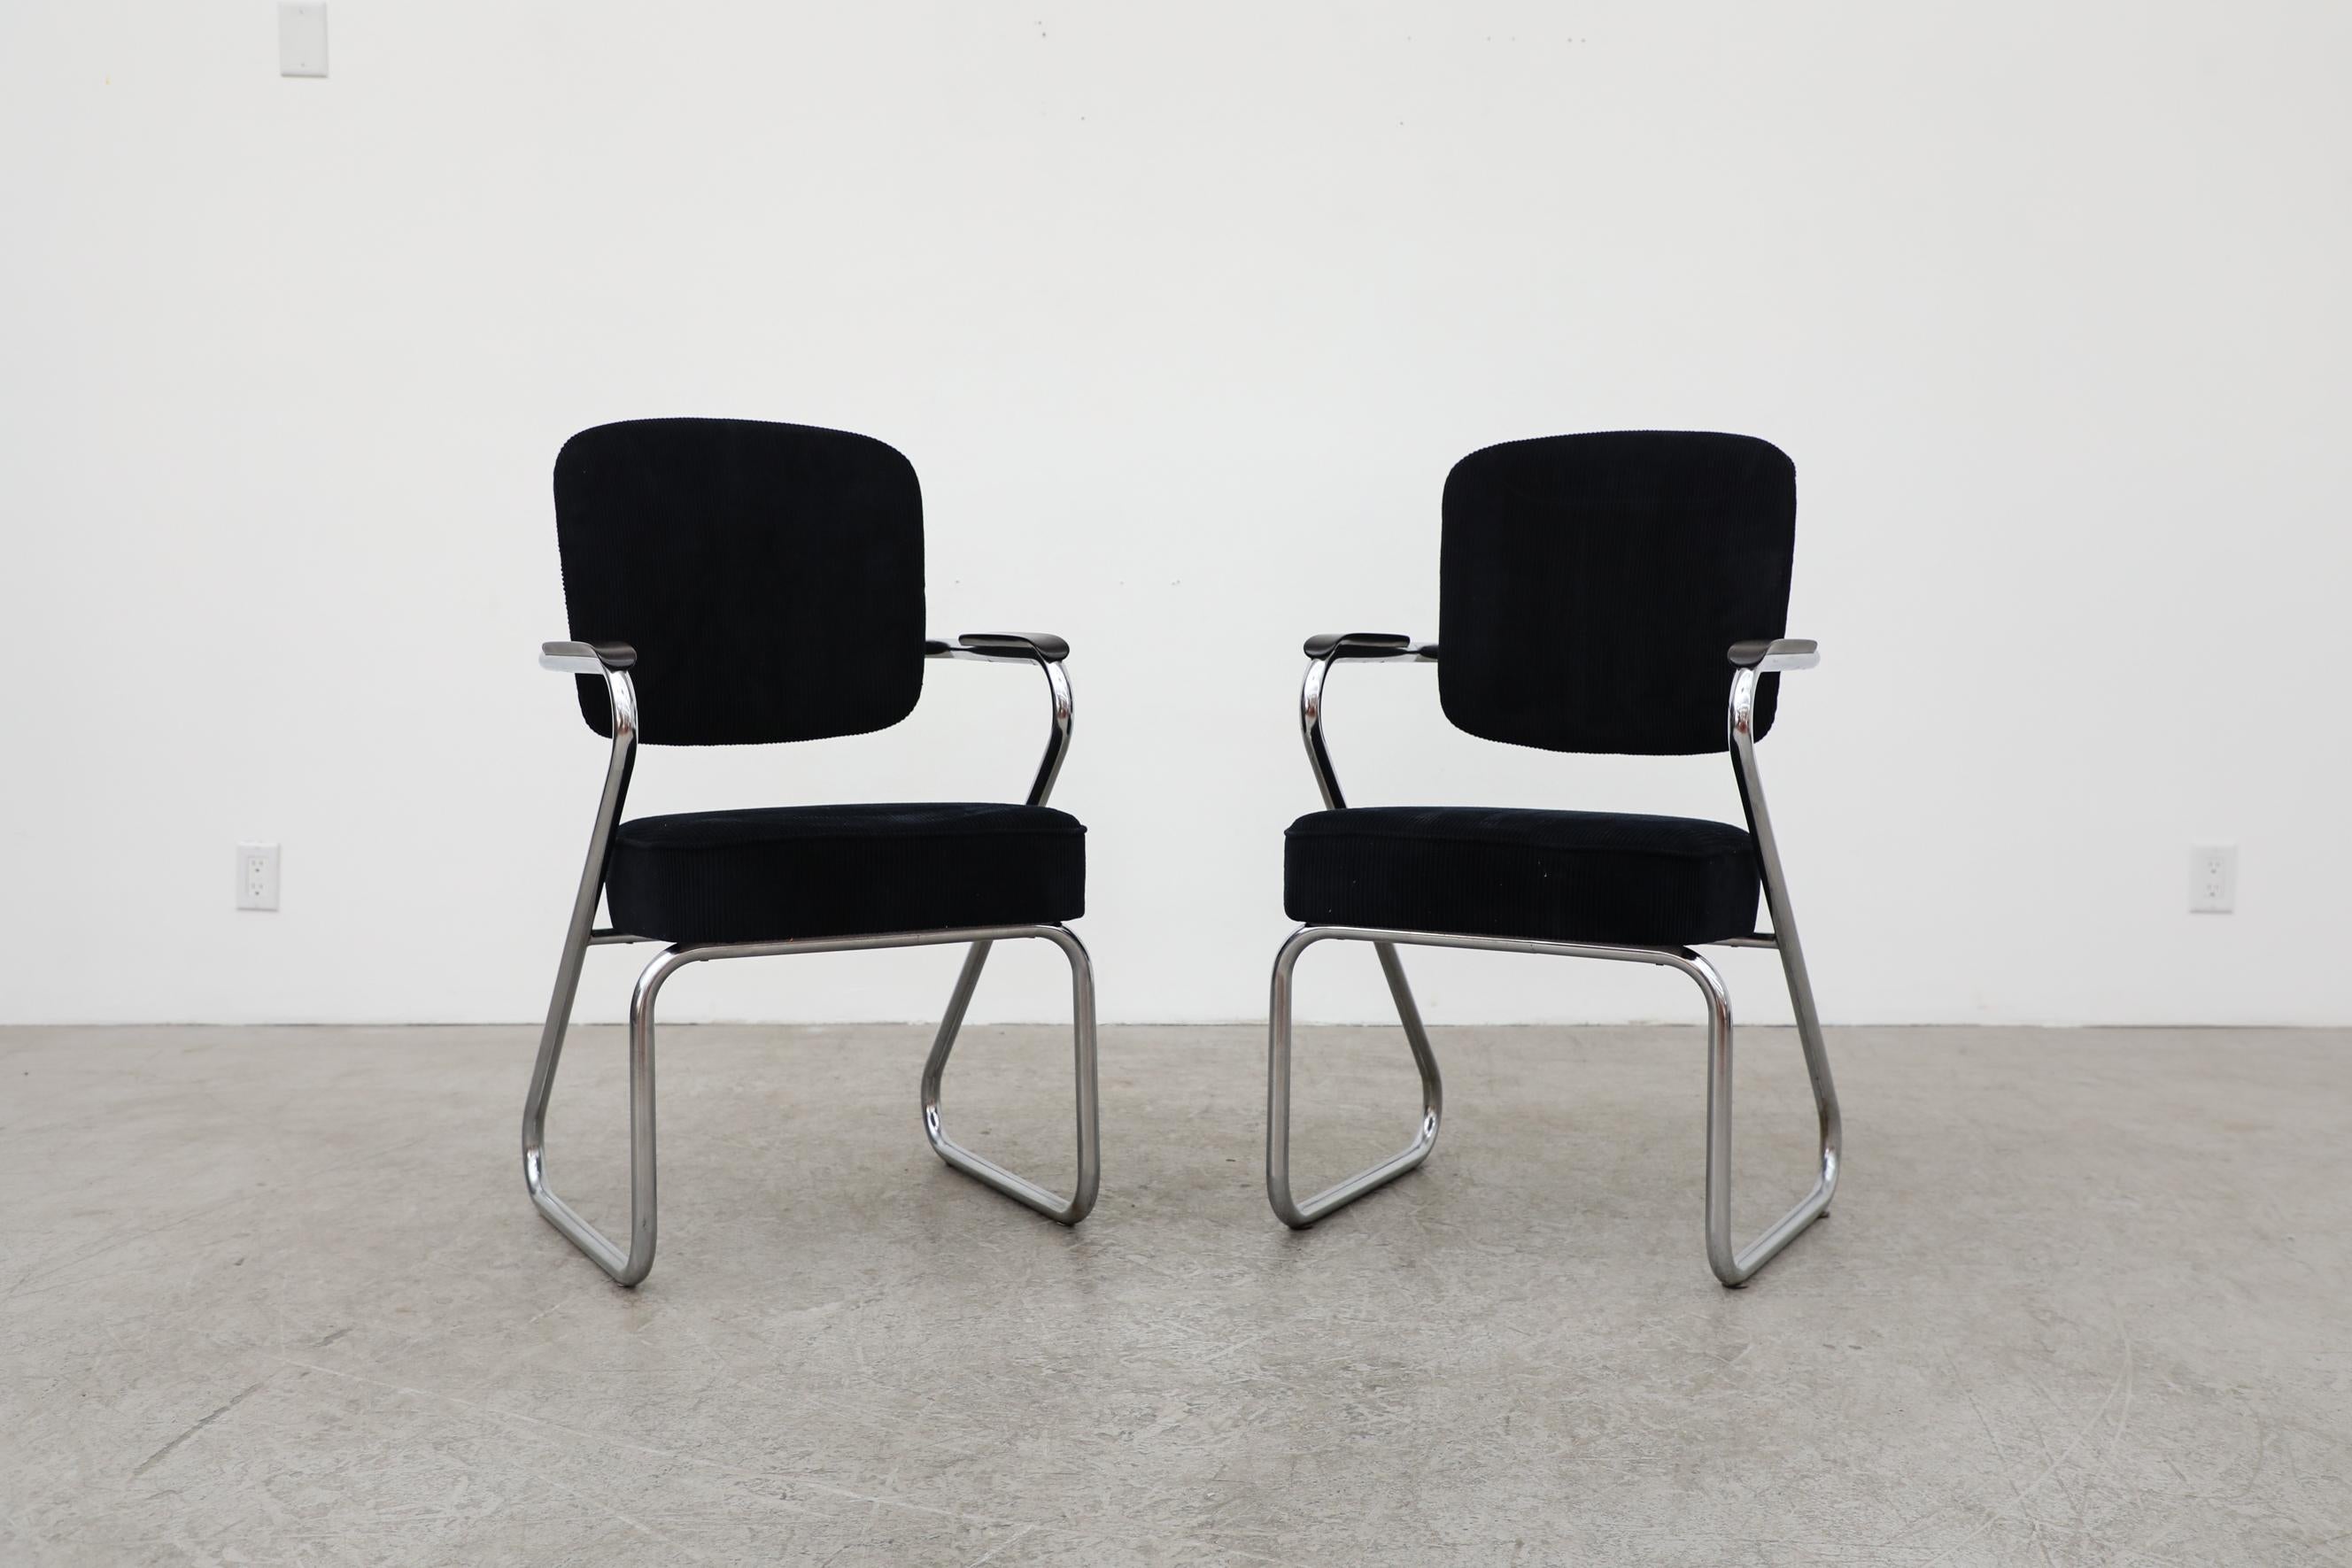 These 1950s black corduroy armchairs were designed by Paul Schuitema for Fana Metaal Rotterdam. Chrome frame in the shape of a 